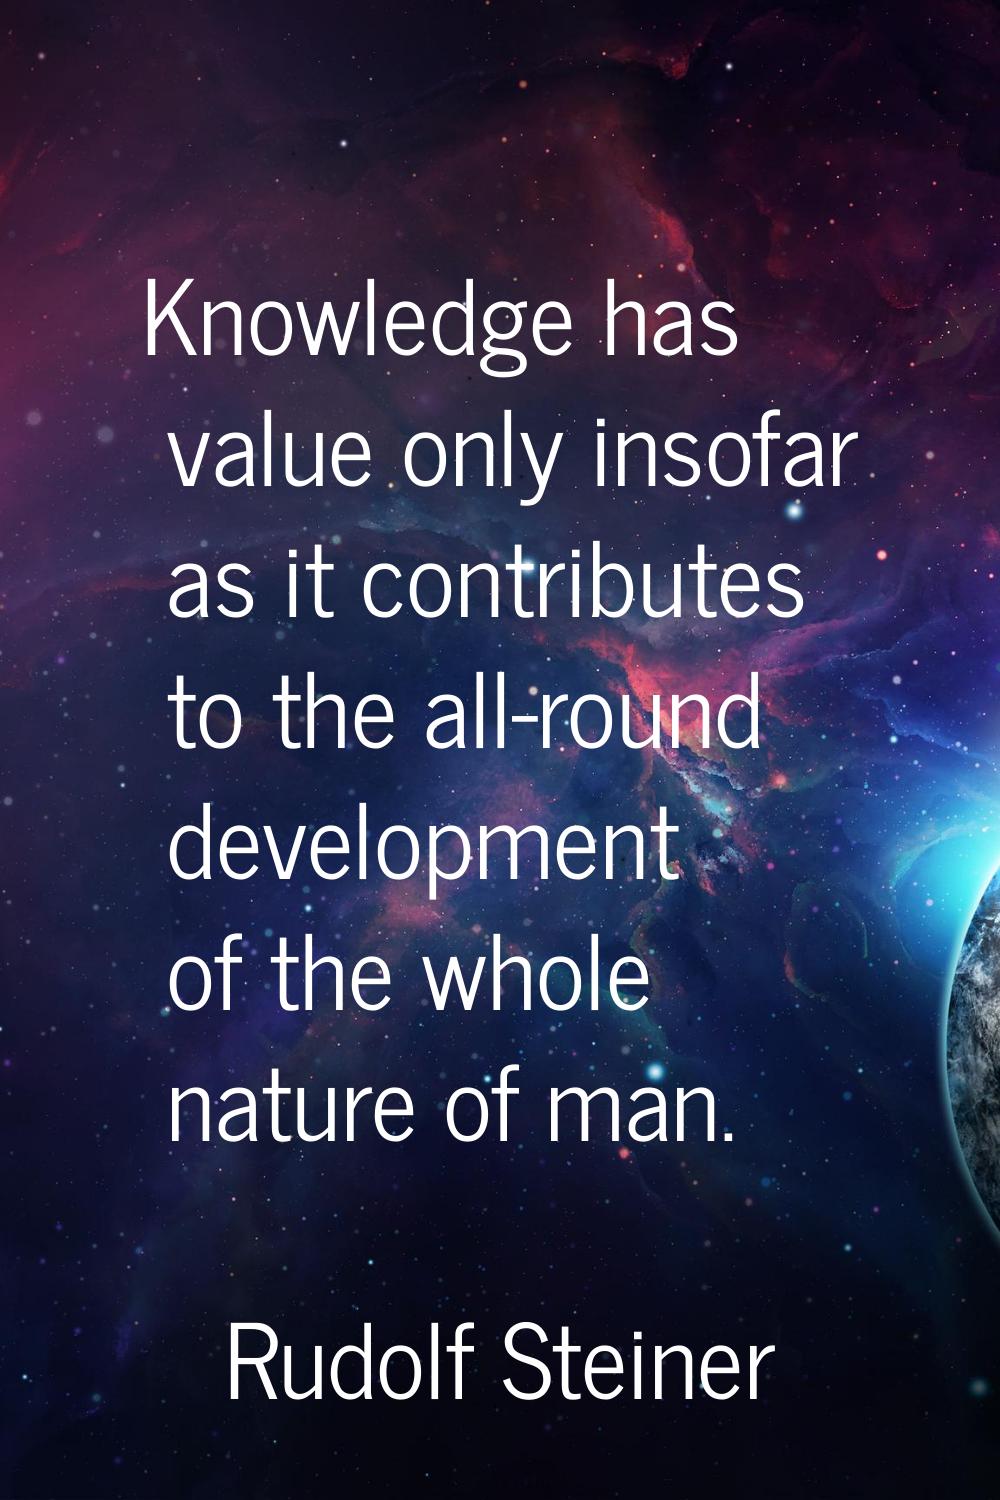 Knowledge has value only insofar as it contributes to the all-round development of the whole nature